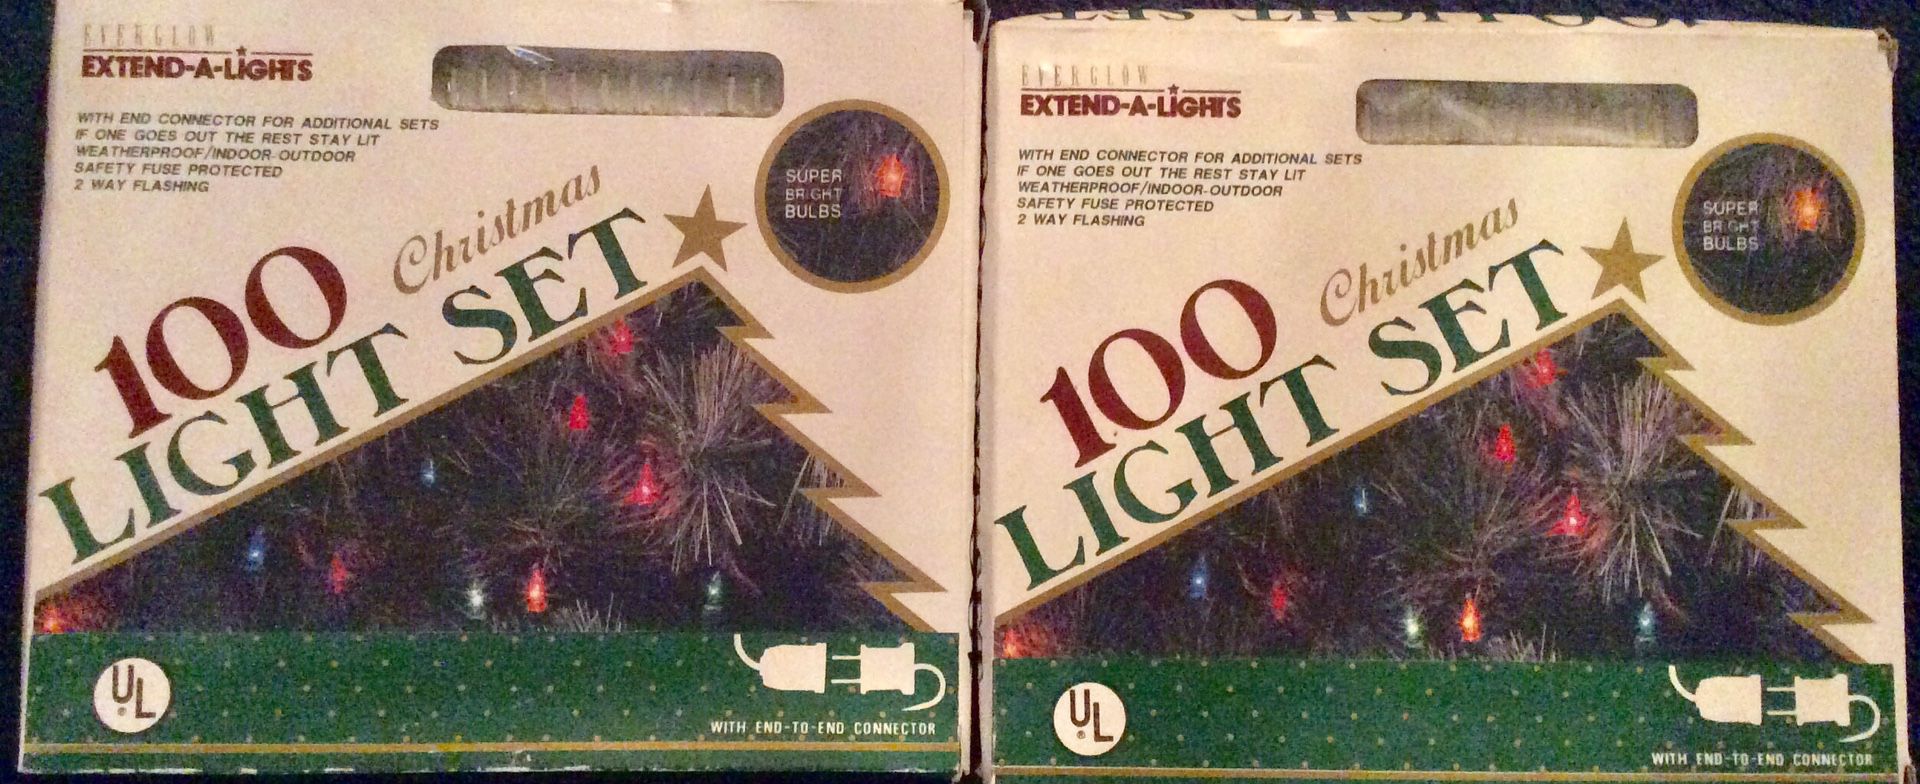 2 New 100 clearlight sets